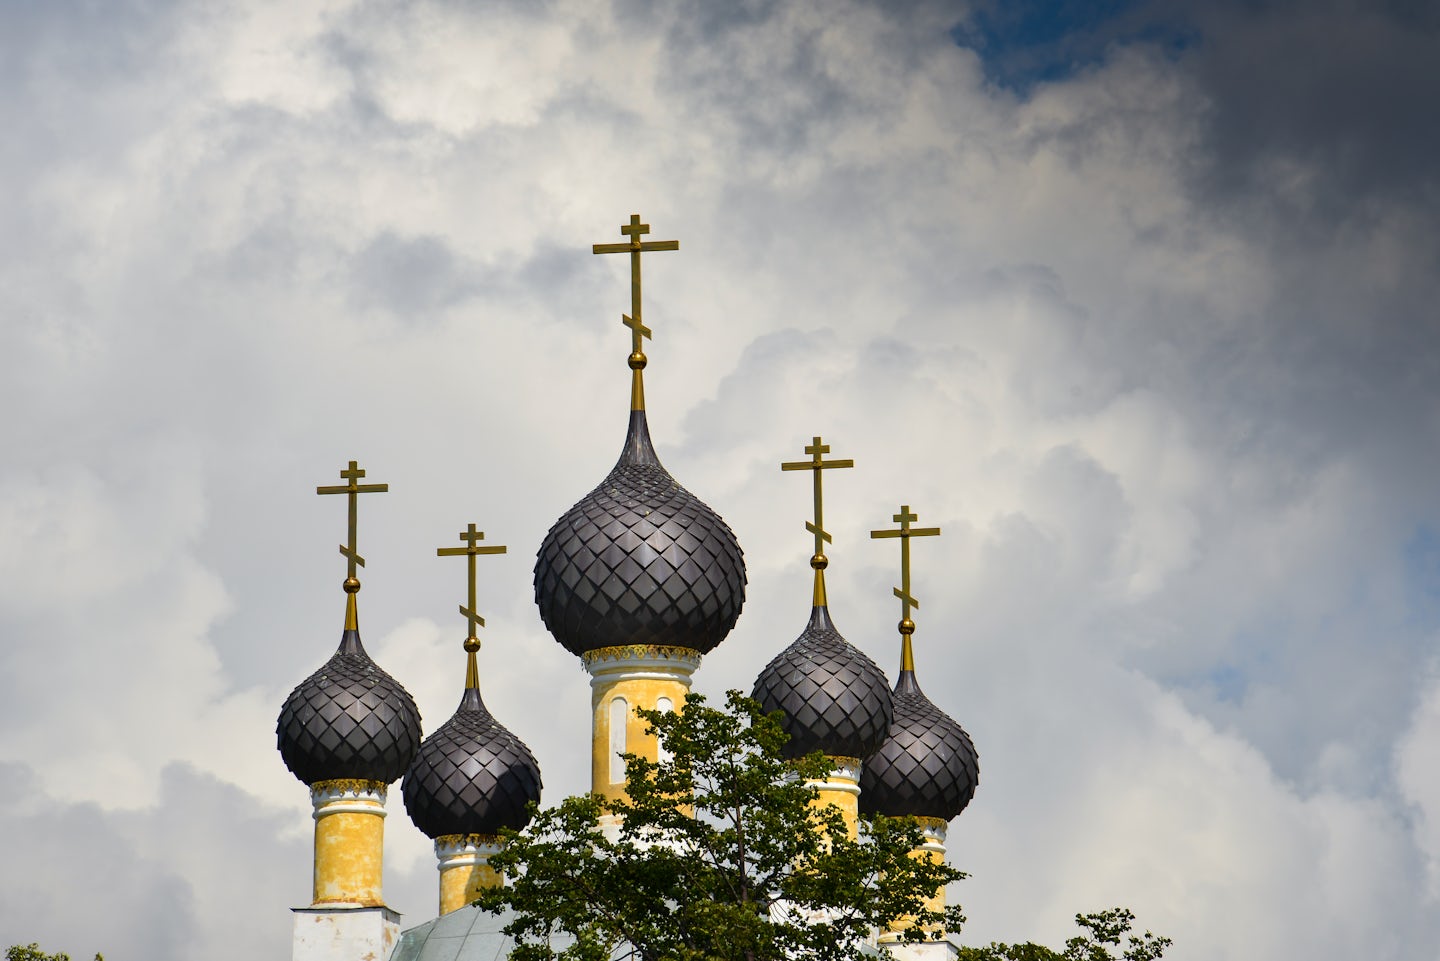 The spires of the Church of St, Dimitri of the Spilled Blood in Uglich.